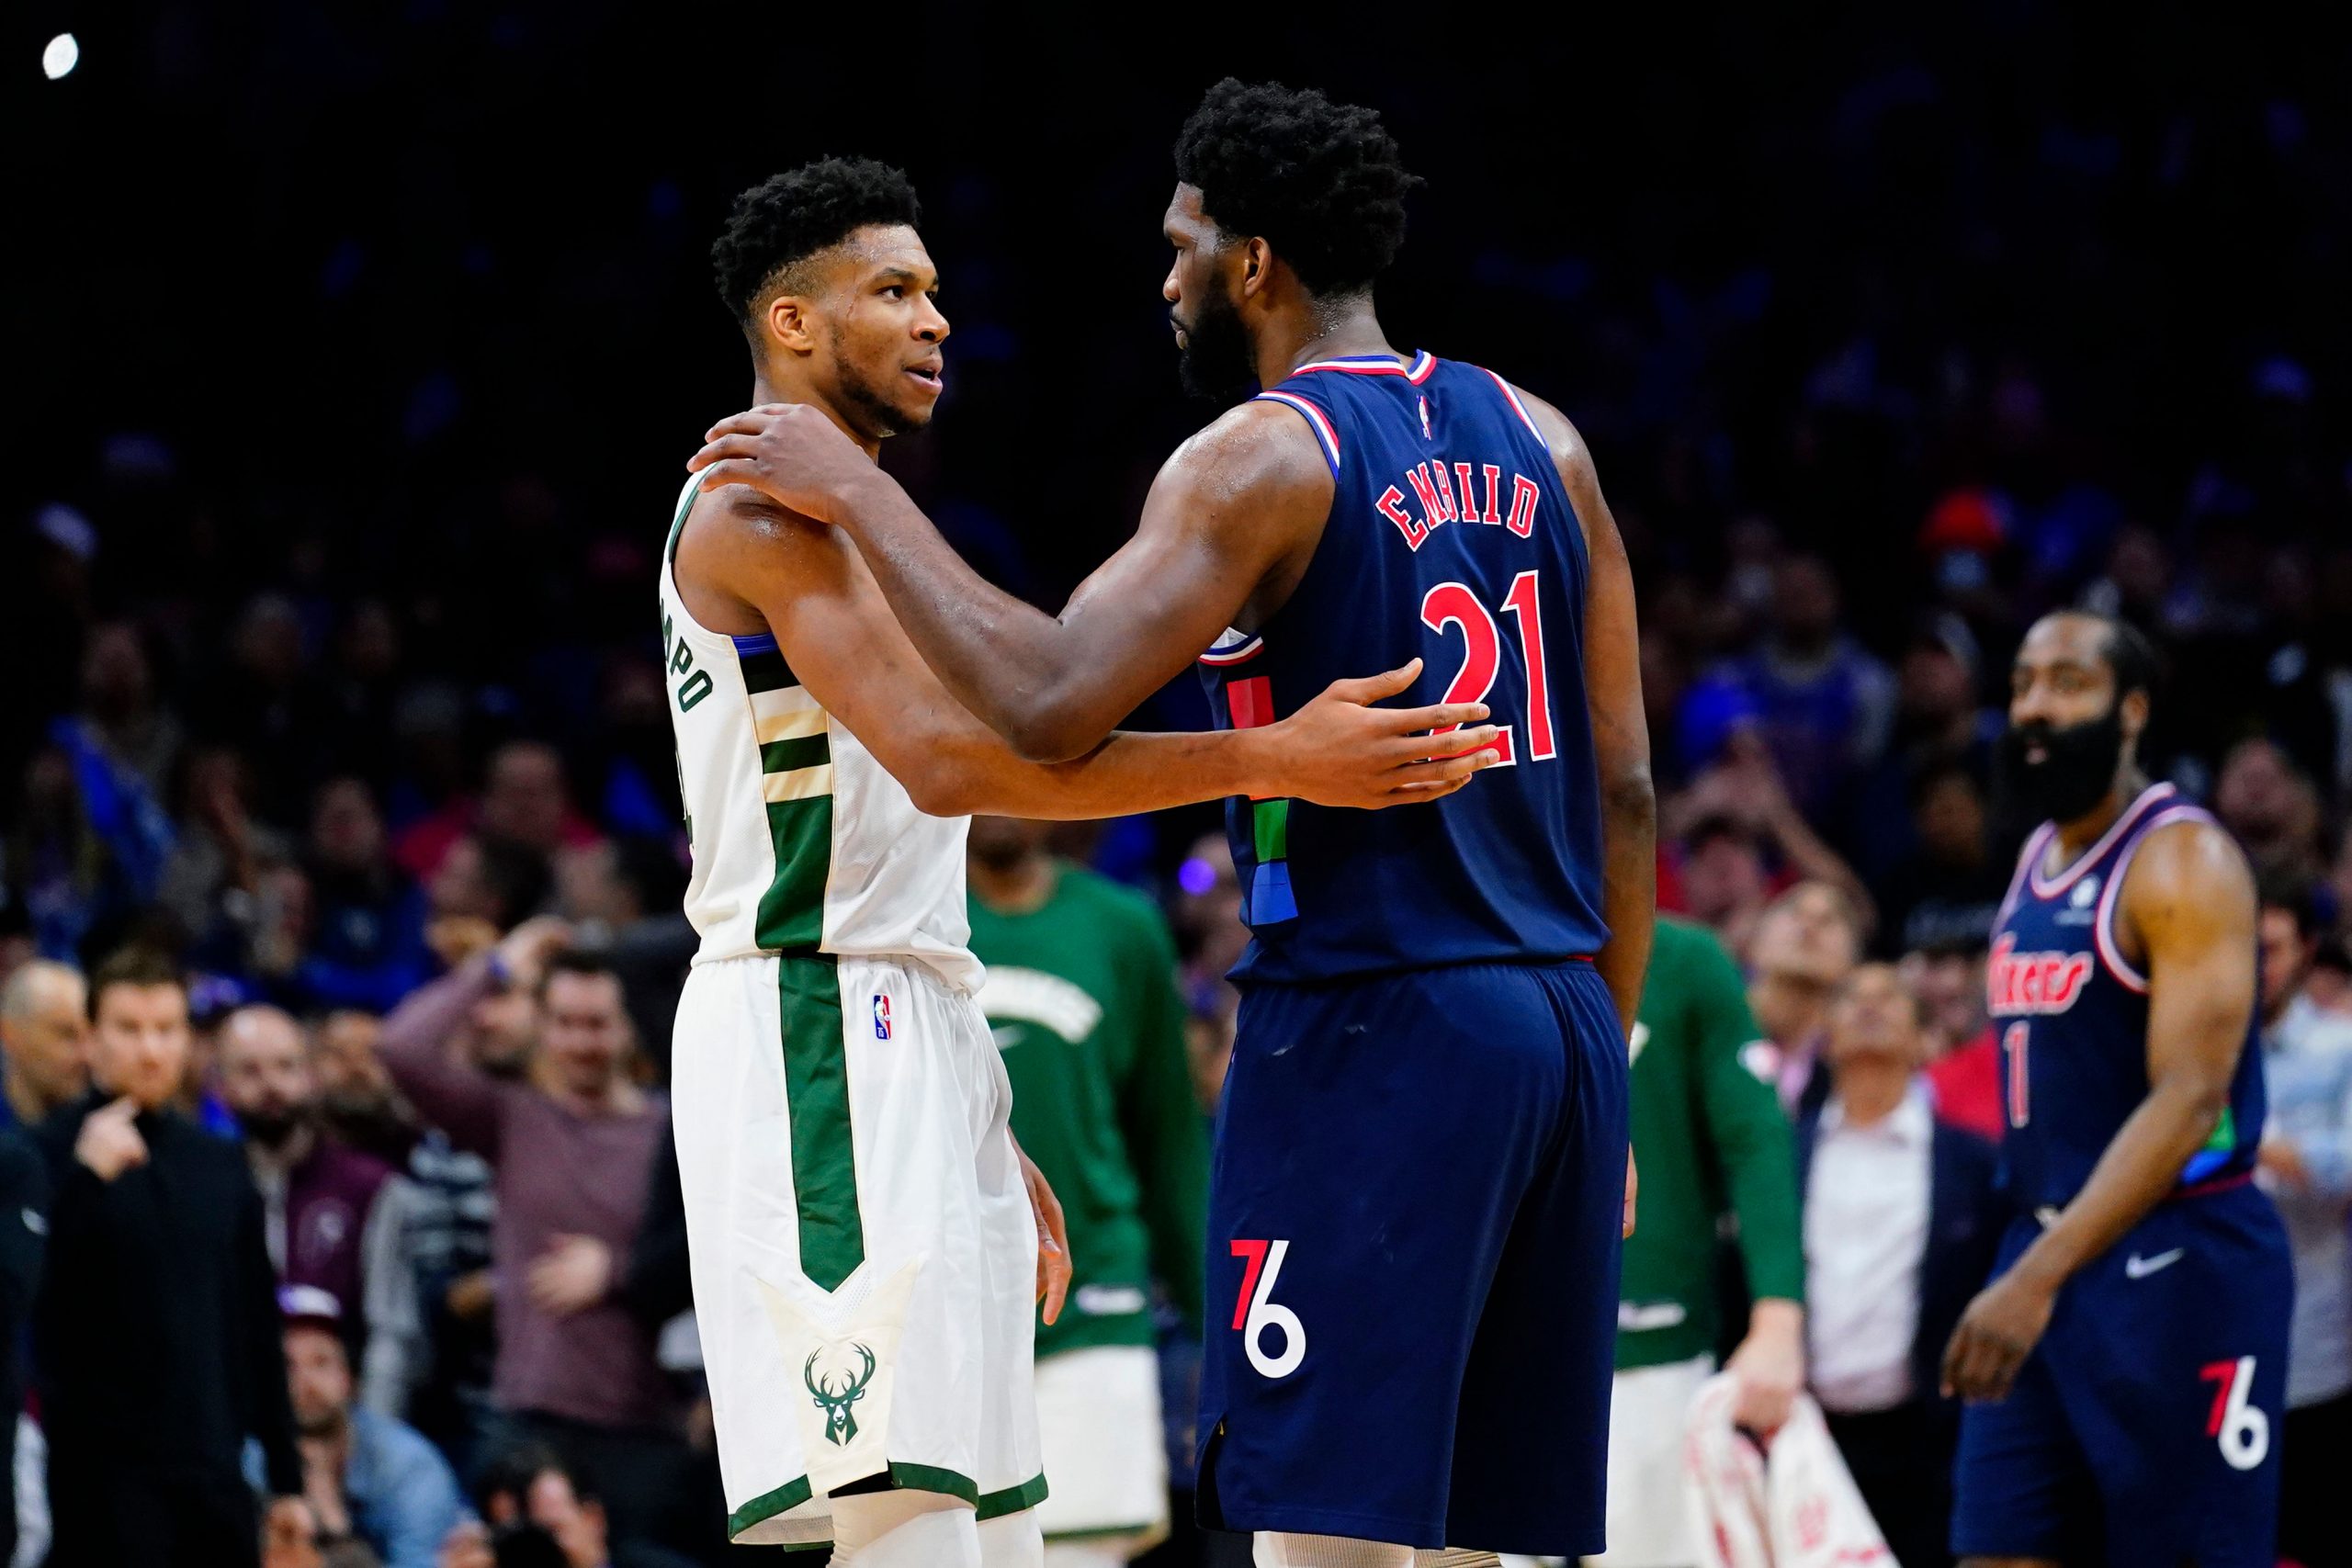 NBA: Antetokounmpo’s 40 points guide Bucks to victory over 76ers